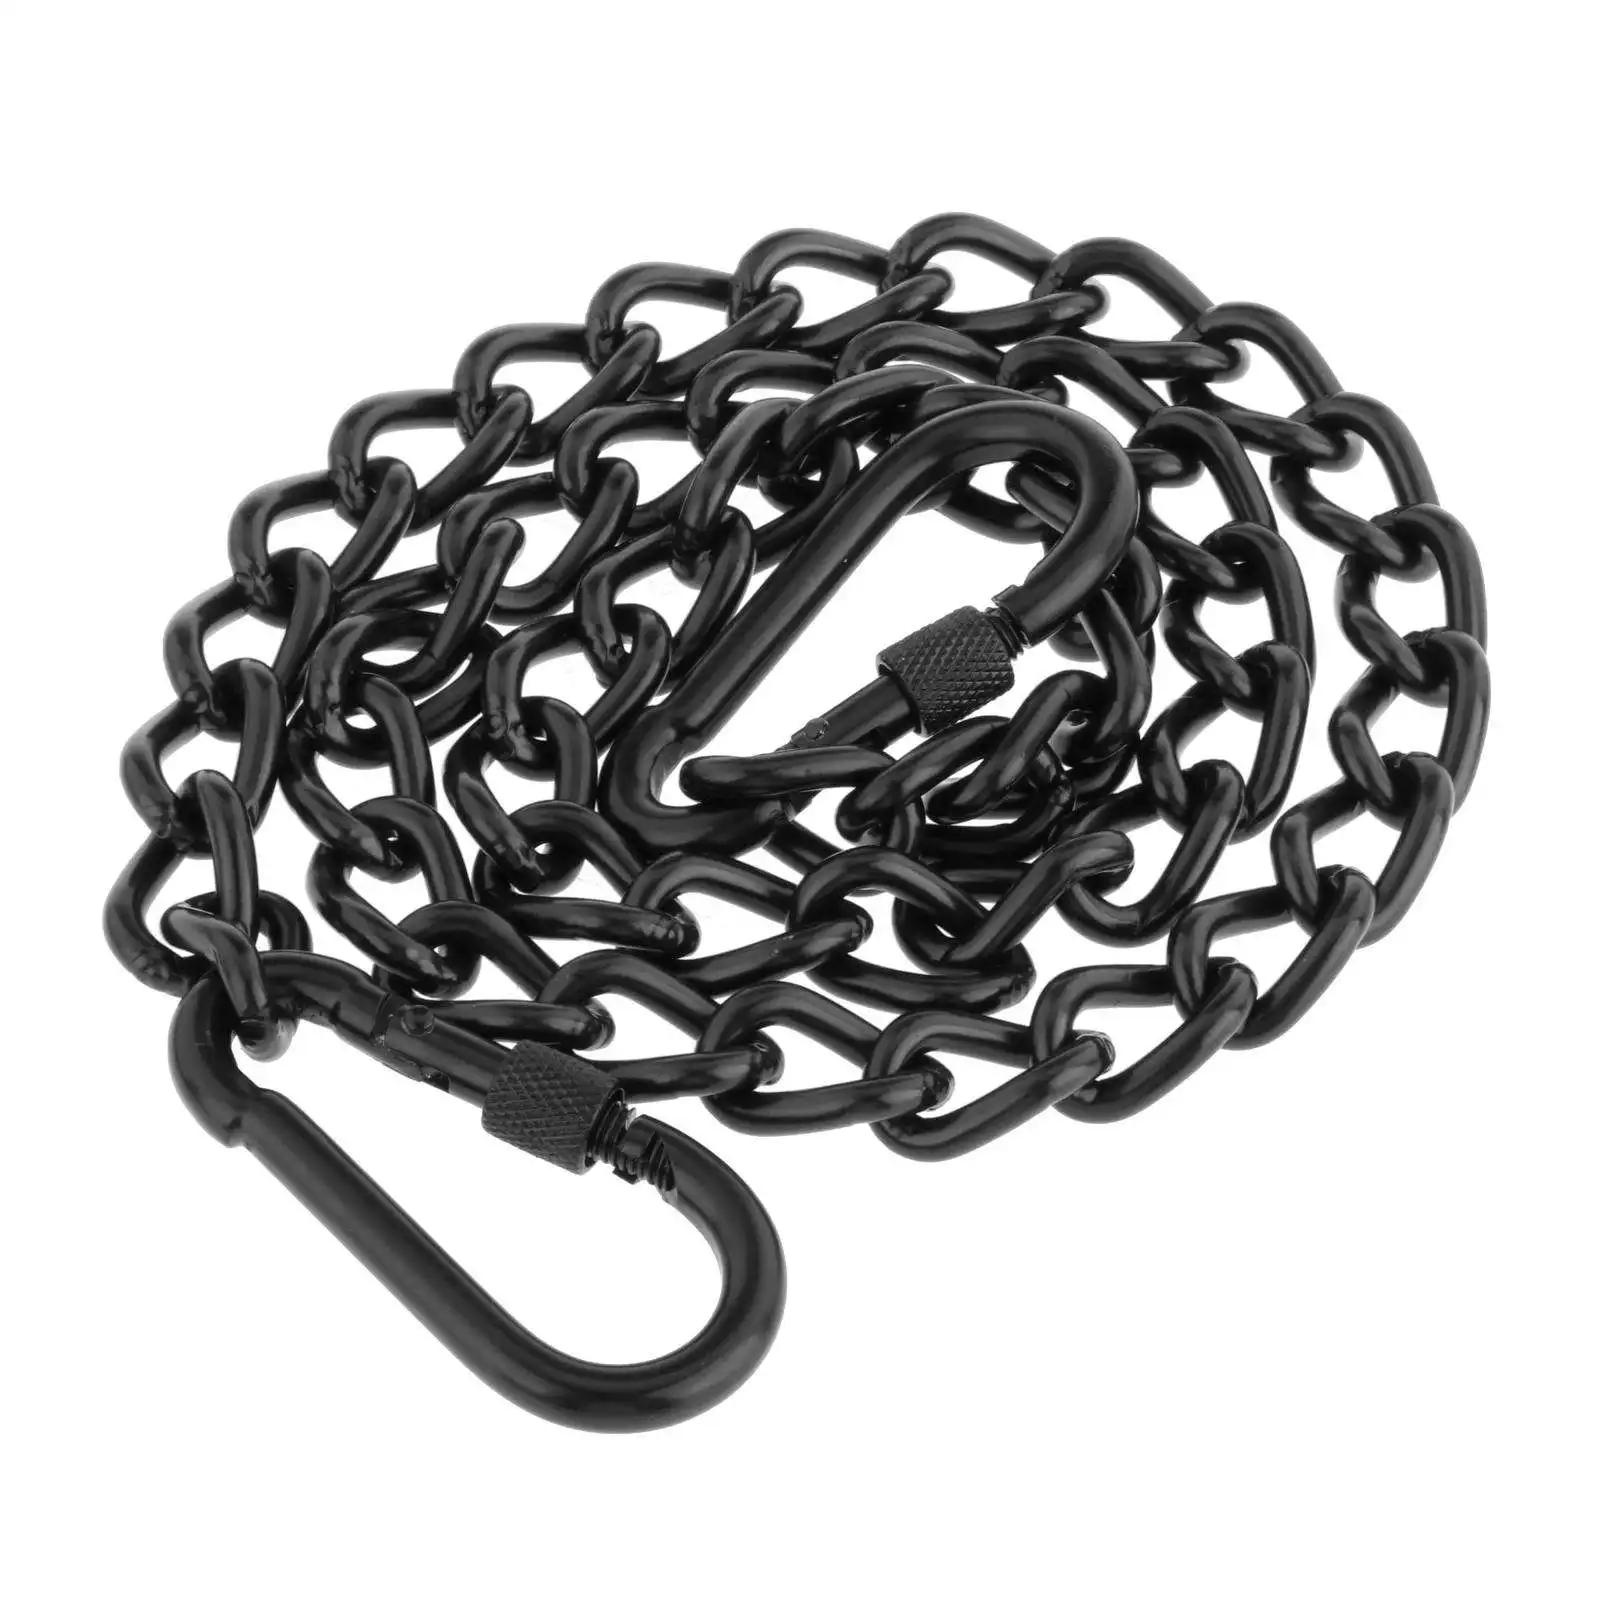 Hanging Chair Chain 200kg Capacity Heavy Duty Variable Attachment Hooks for Hanging Chair Hammock